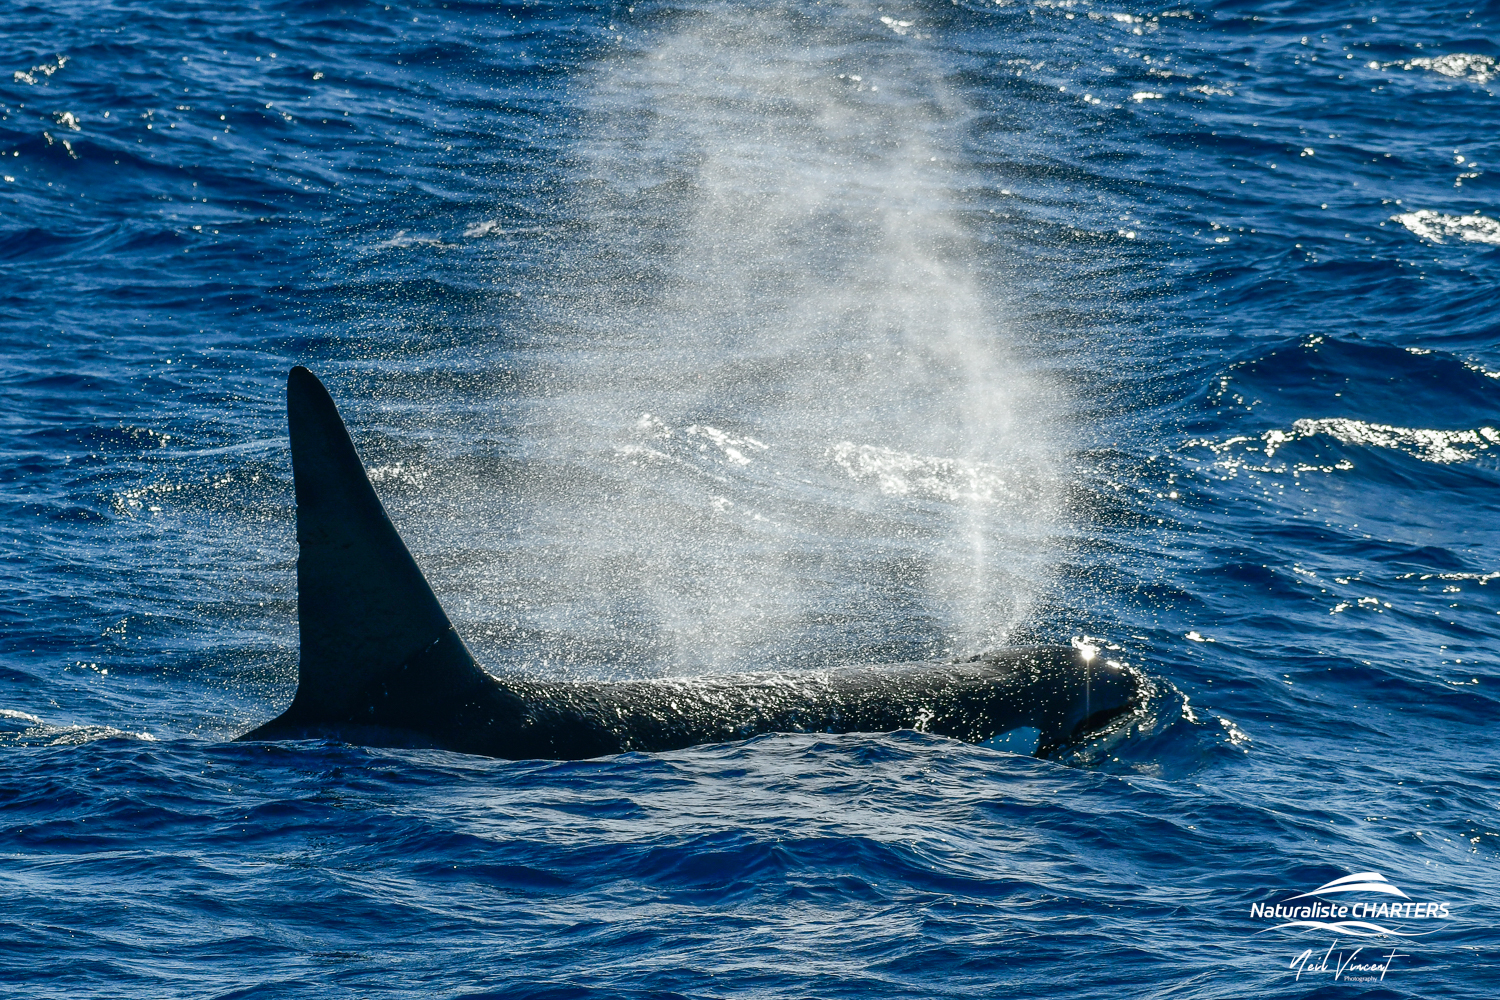 A Great Day in Bremer Bay: Orcas, Pilot Whales, Squid, and a Sperm Whale!